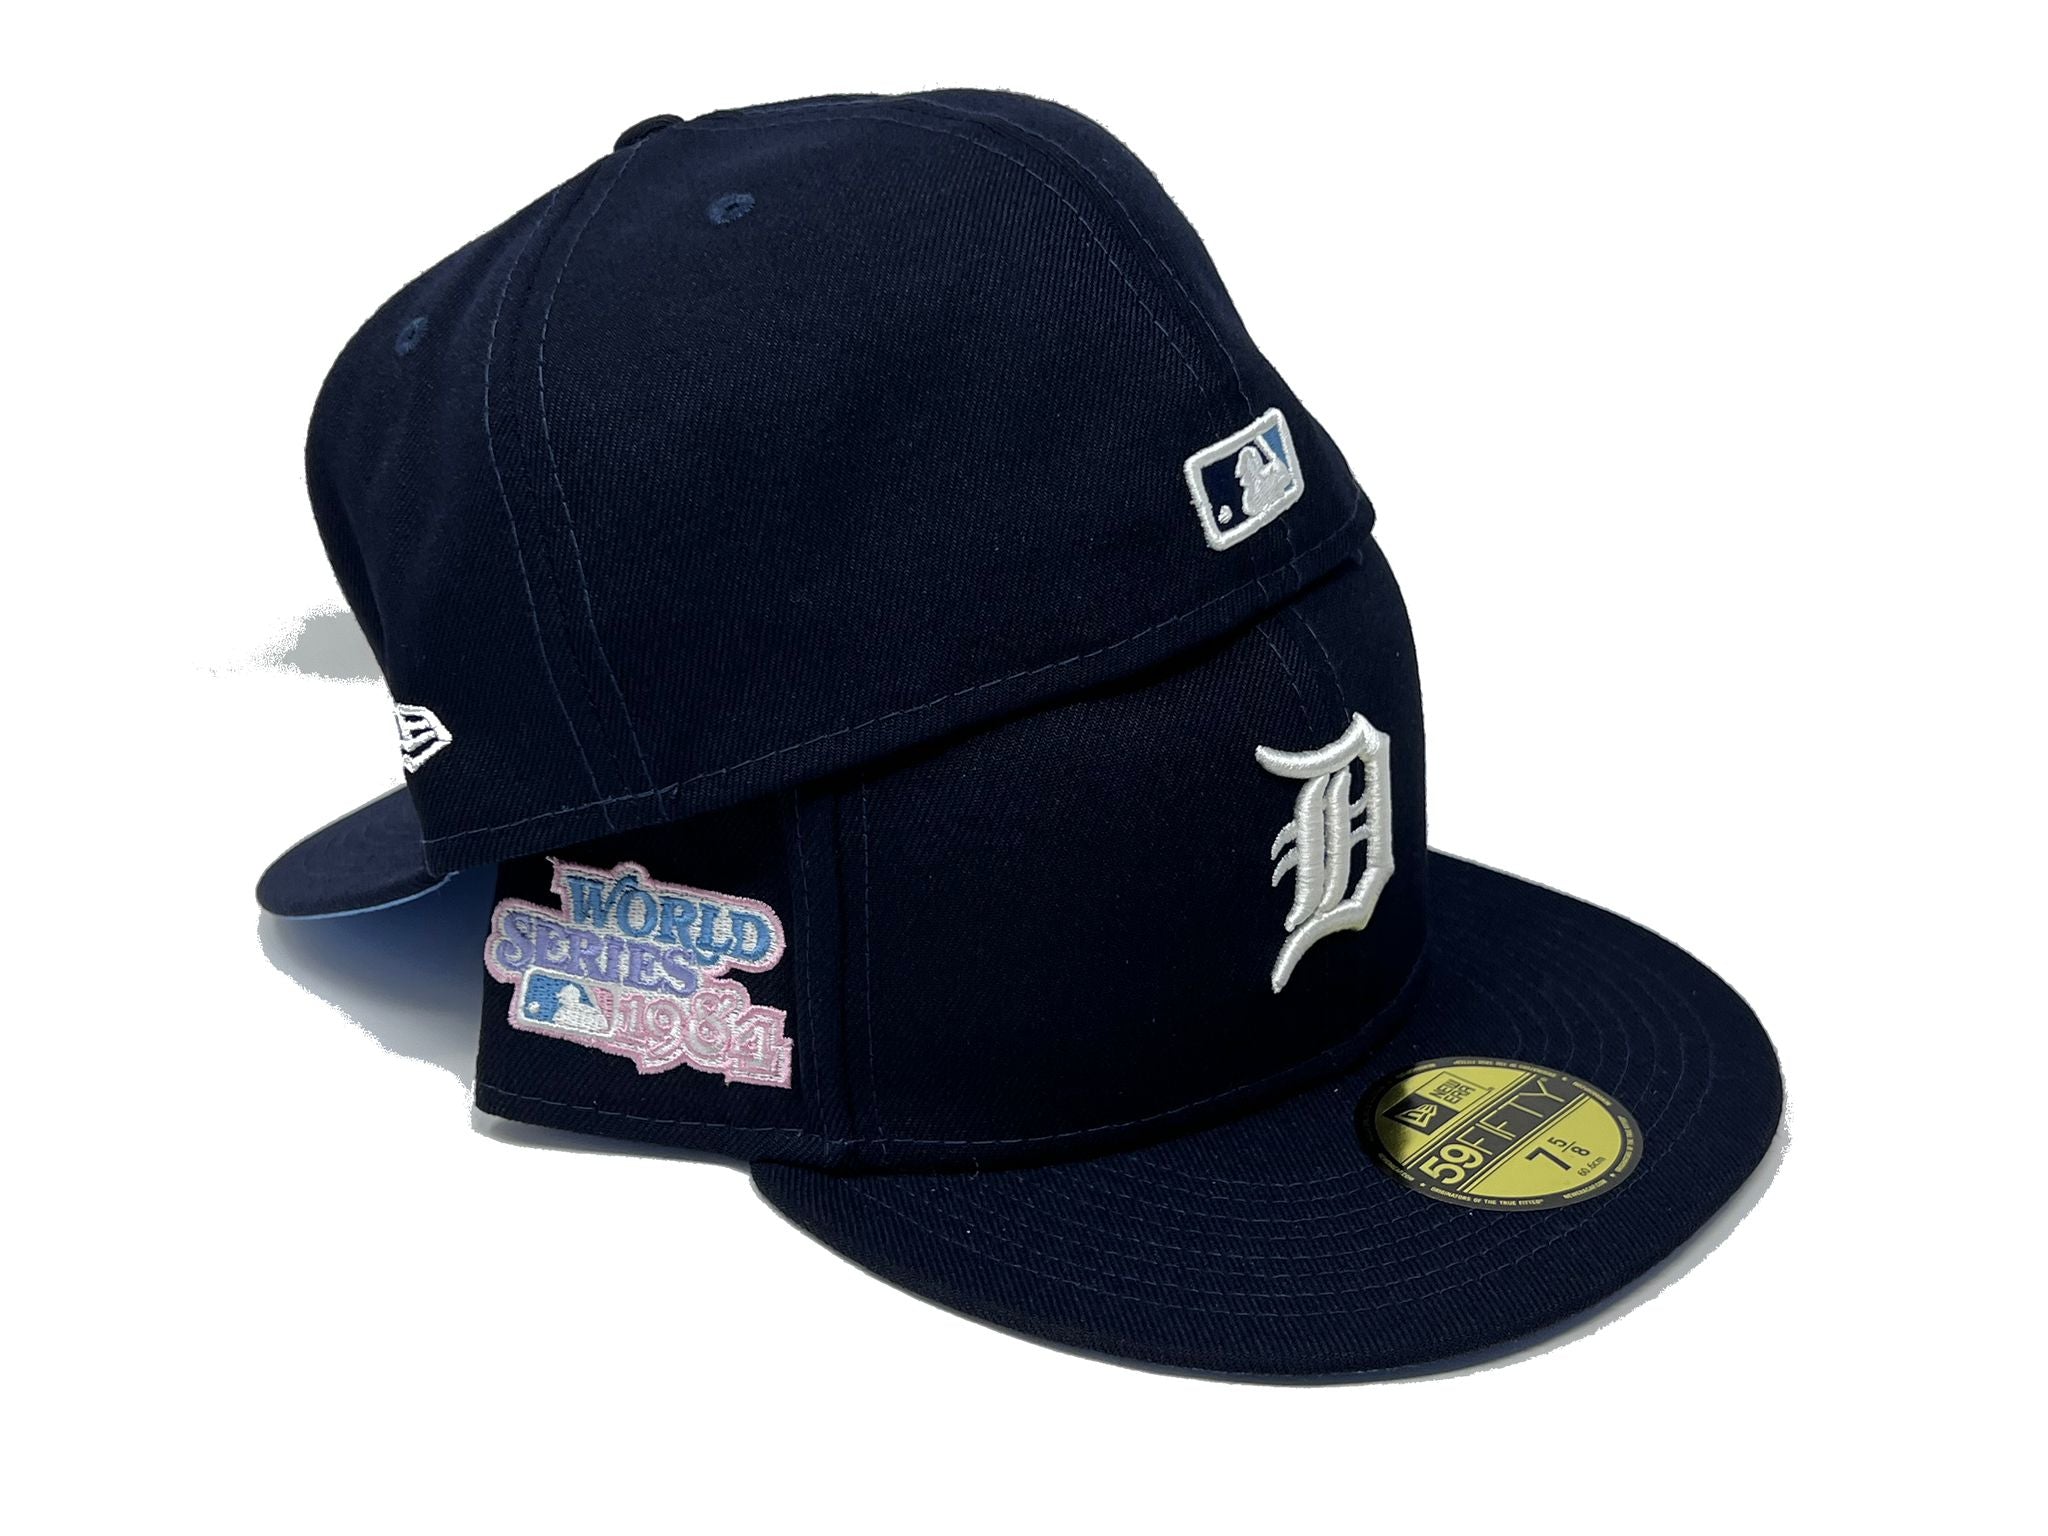 Los Angeles Dodgers New Era 1981 World Series Fashion Color Undervisor  59FIFTY Fitted Hat - Pink